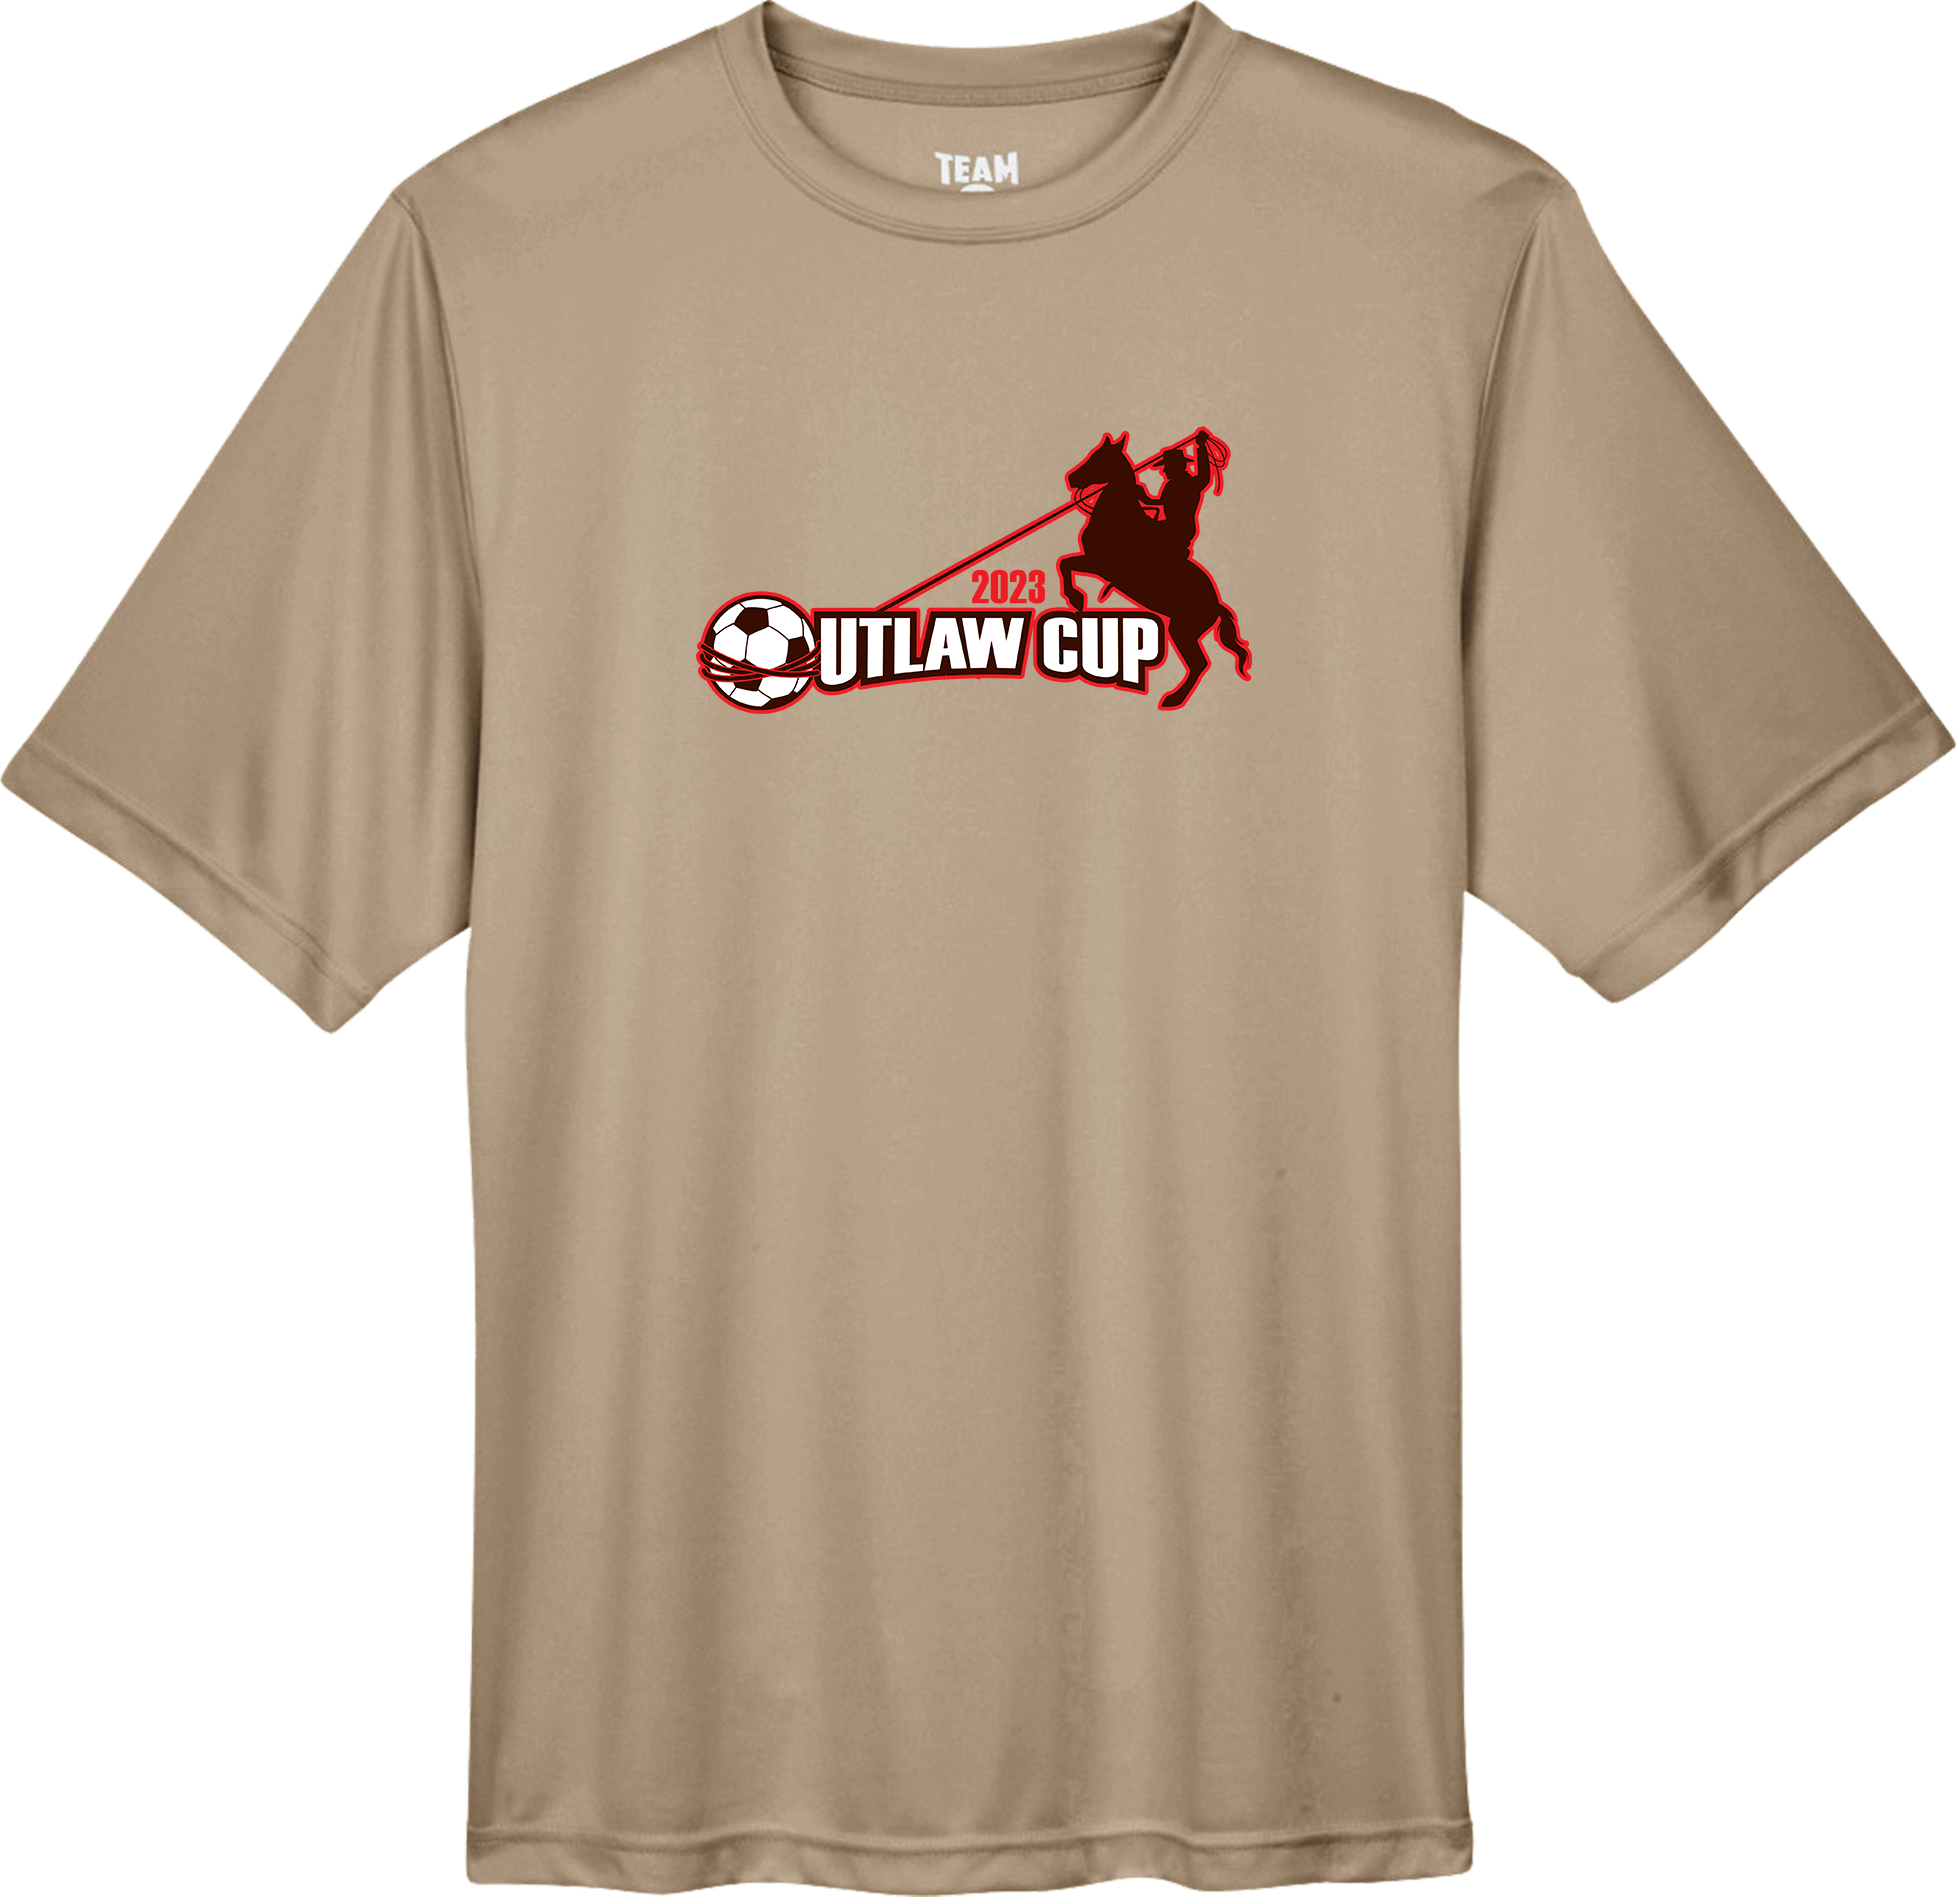 PERFORMANCE SHIRTS - 2023 Outlaw Cup